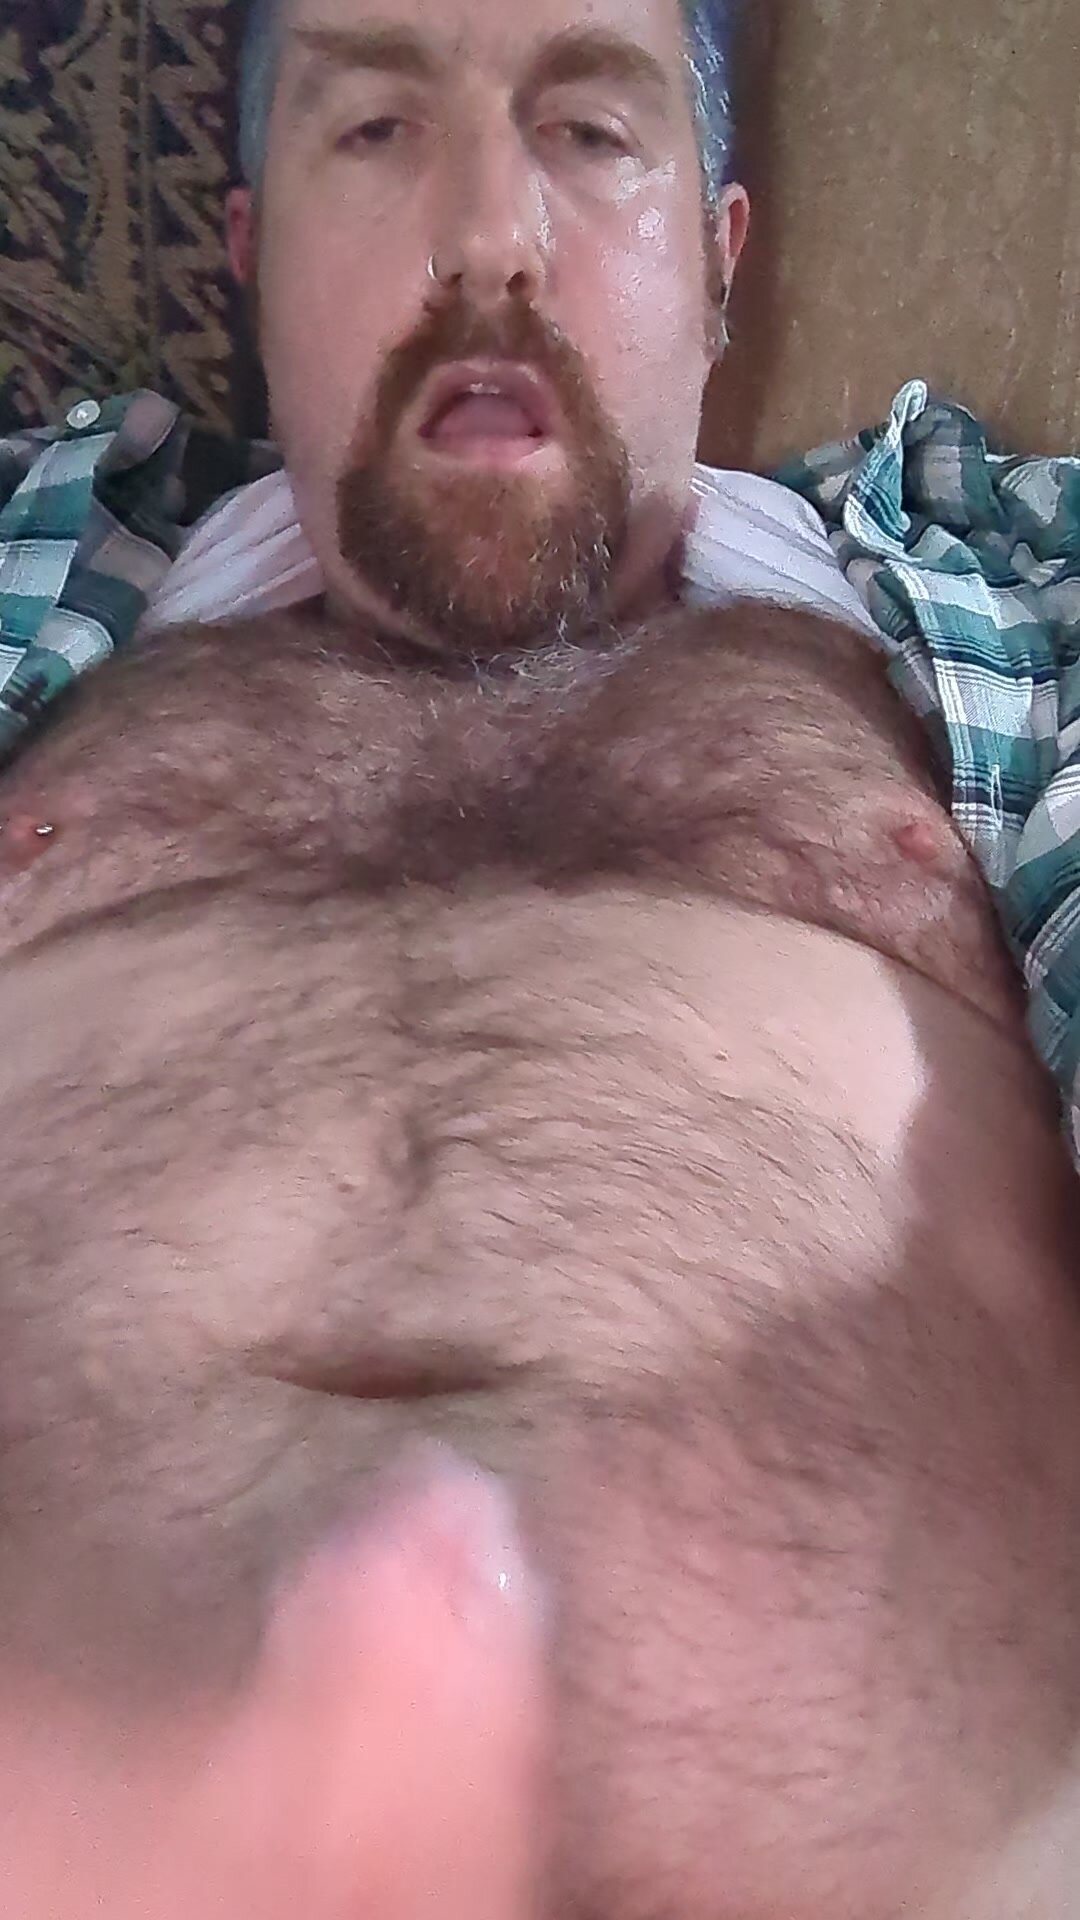 Bear shoots all over his chest and face